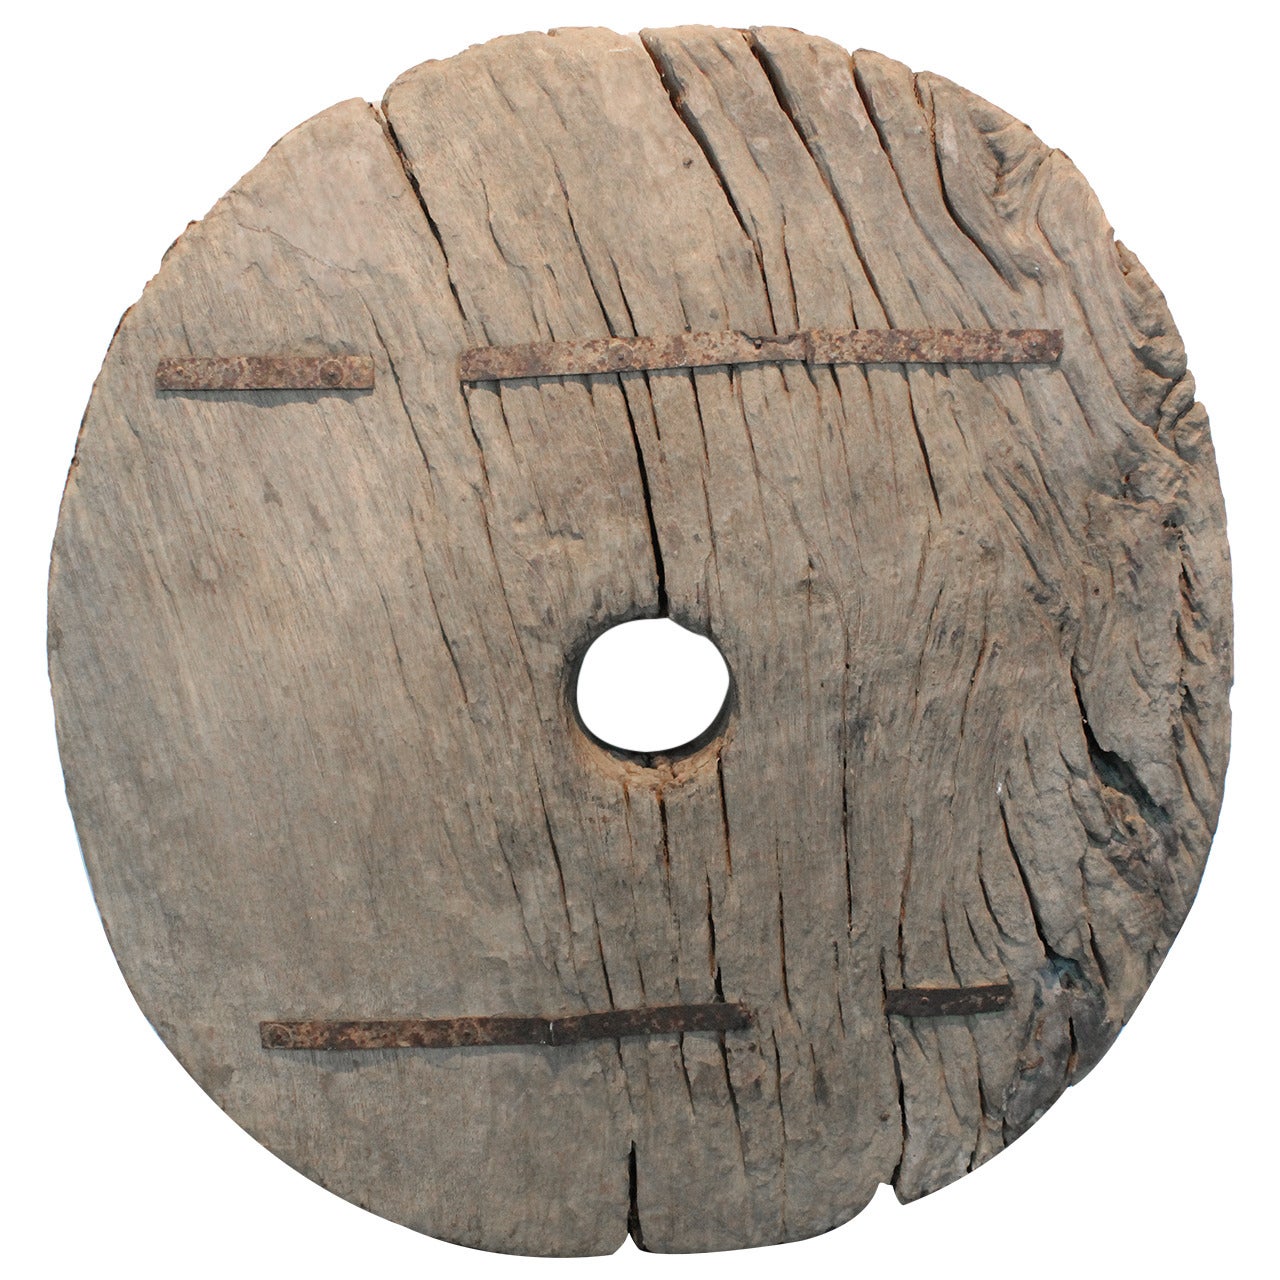 19th Century Heavily Weathered Asian Wooden Wheel For Sale